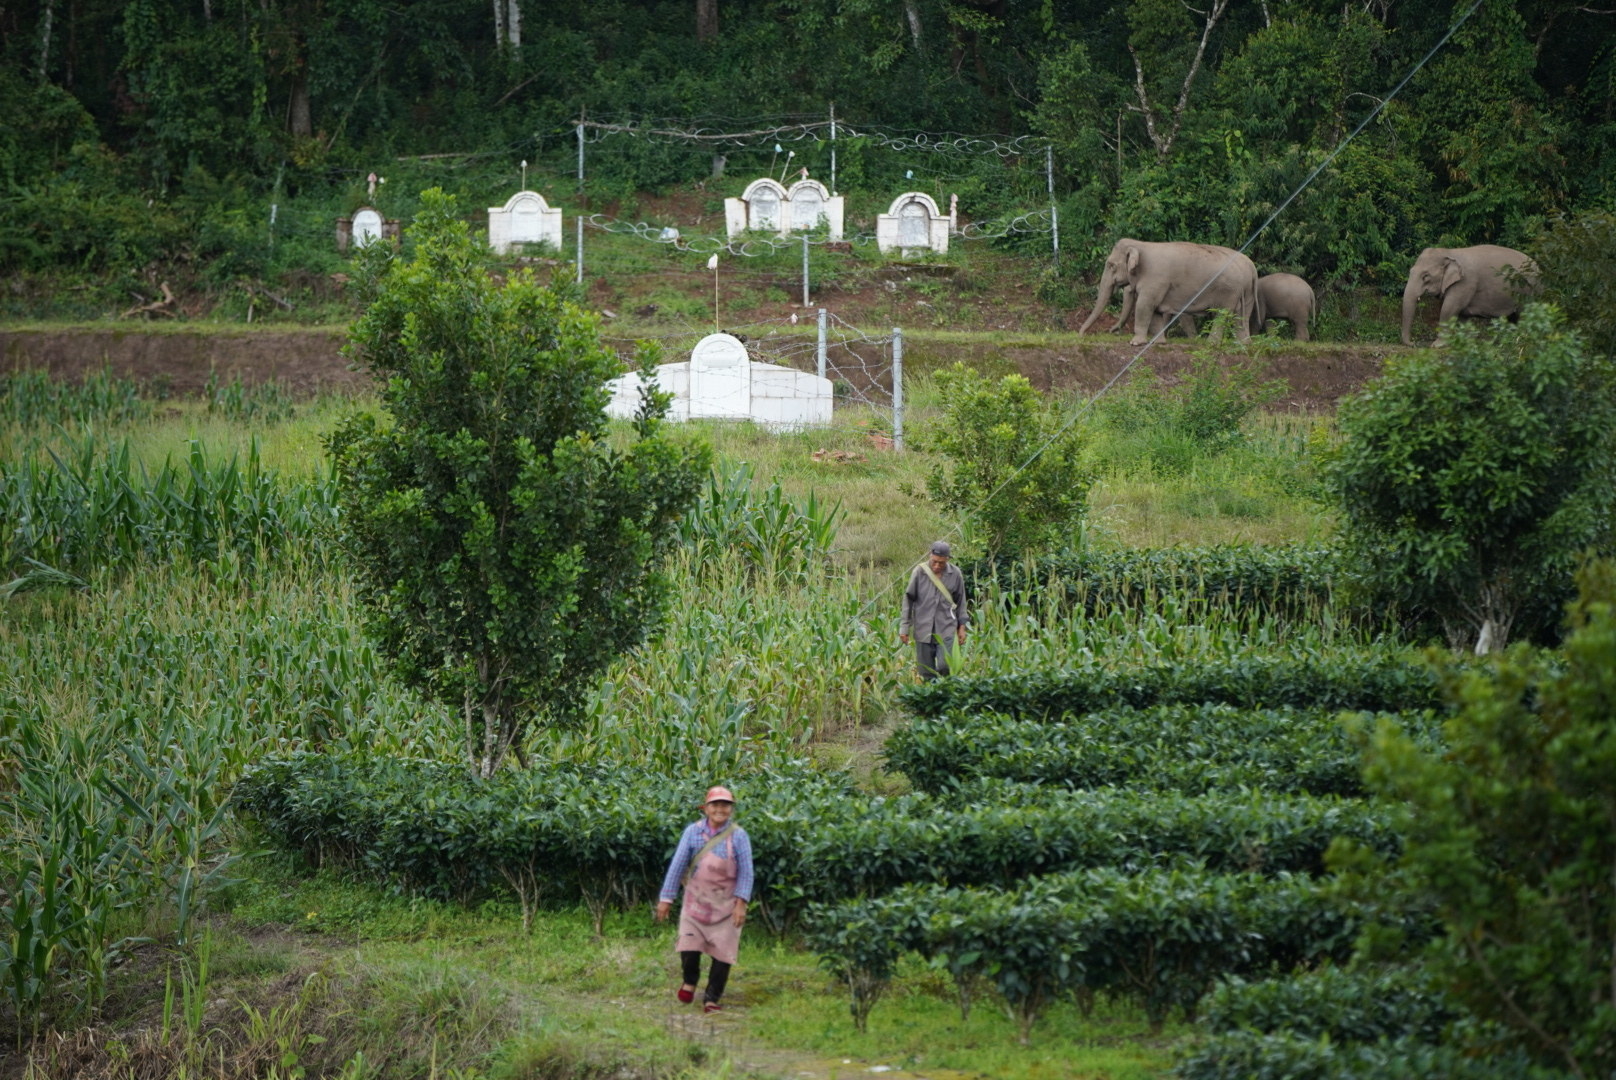 Two farmers walking through a field of agriculture are dwarfed by three elephants walking in the background